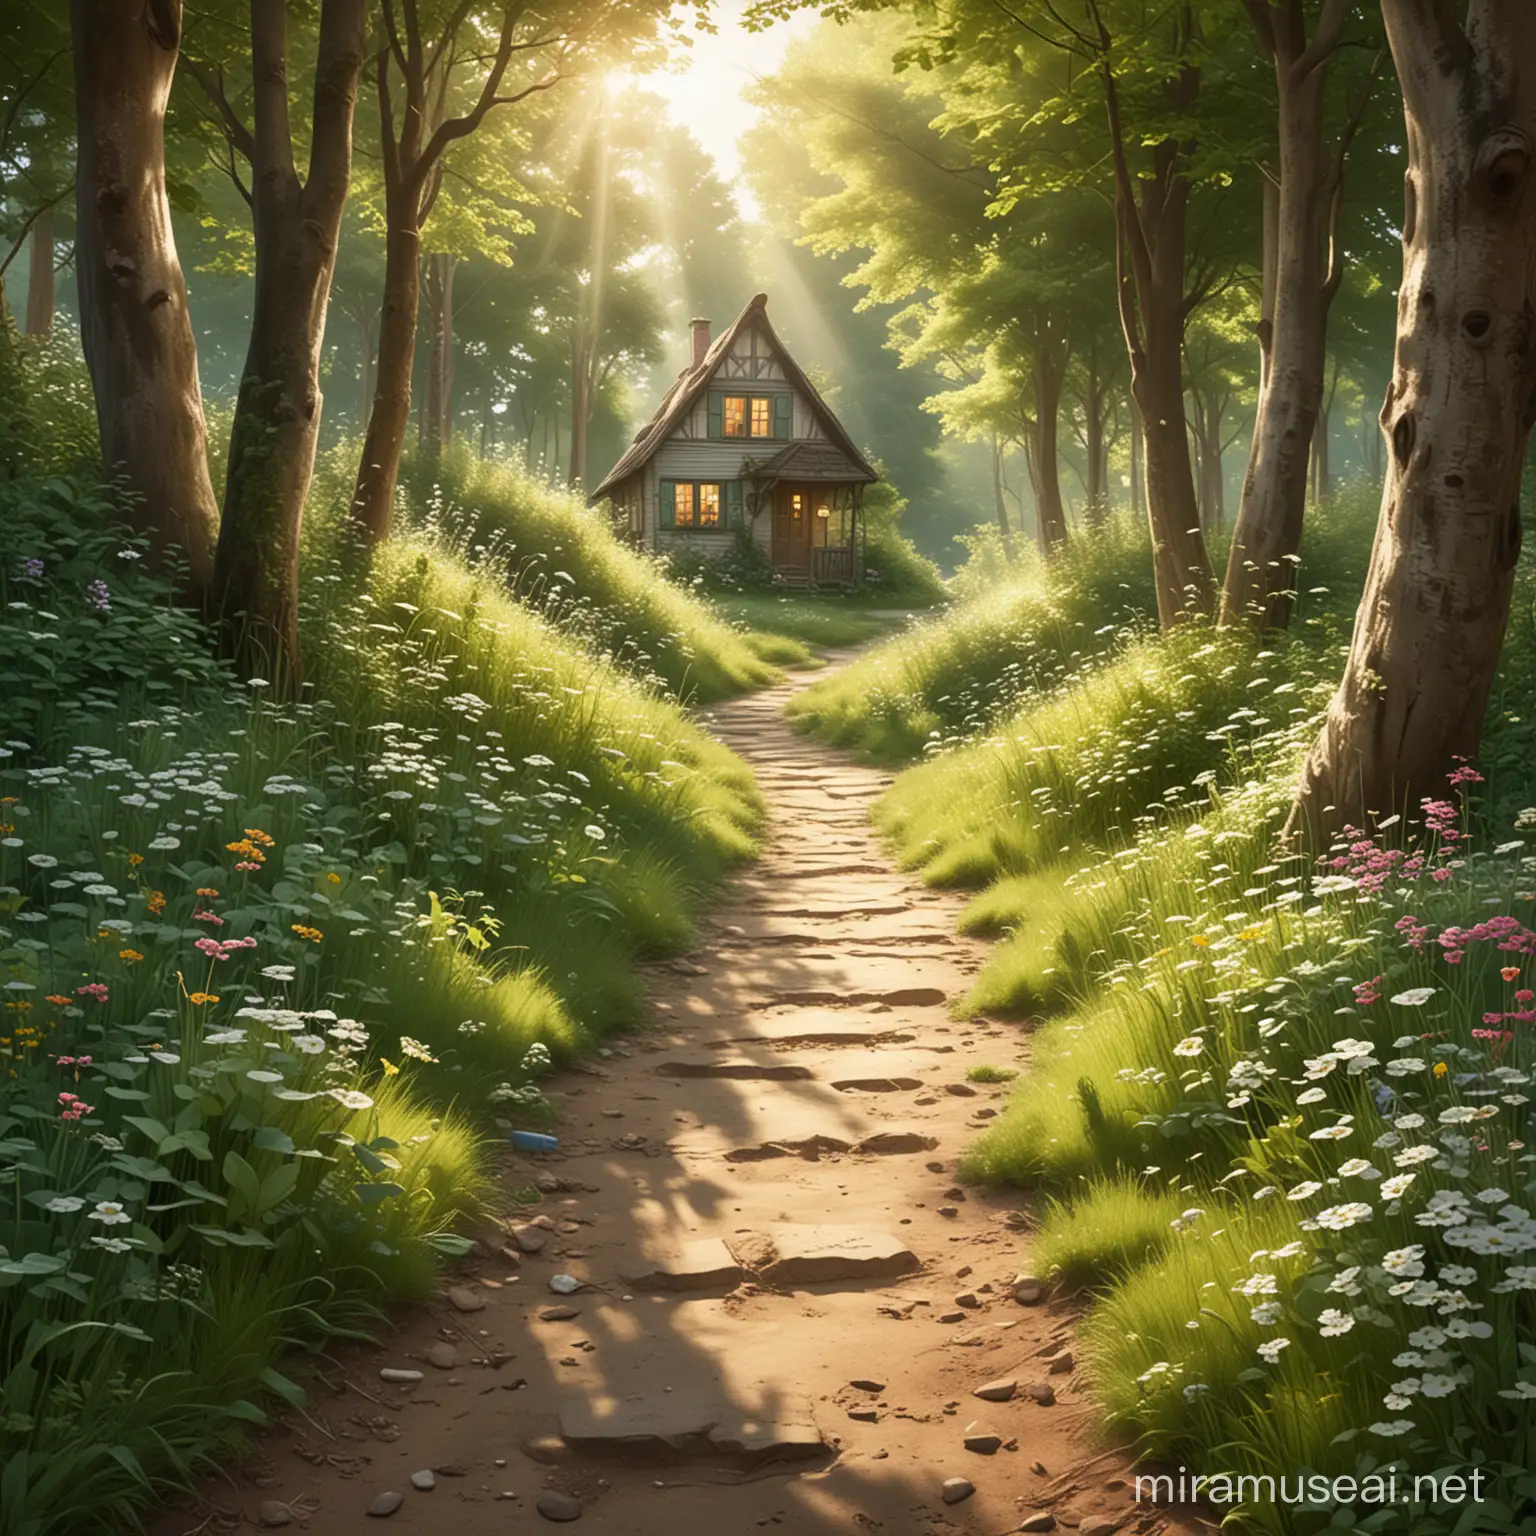 The image could include the following elements:A cozy path covered with soft grass and framed by tall trees with green leaves.Sunbeams penetrating through the foliage and creating playful glints on the ground.A small house in the distance, surrounded by blooming flowers, which adds a sense of mystery and coziness to the illustration.Traces of little footsteps on the path, as well as scattered toys such as balls, dolls, and toy cars, adding a touch of magic and adventure.The overall atmosphere of the illustration should convey the joy and delight of childhood.Ideally, the image should have bright and vibrant colors to enhance the magical atmosphere and bring the illustration to life.